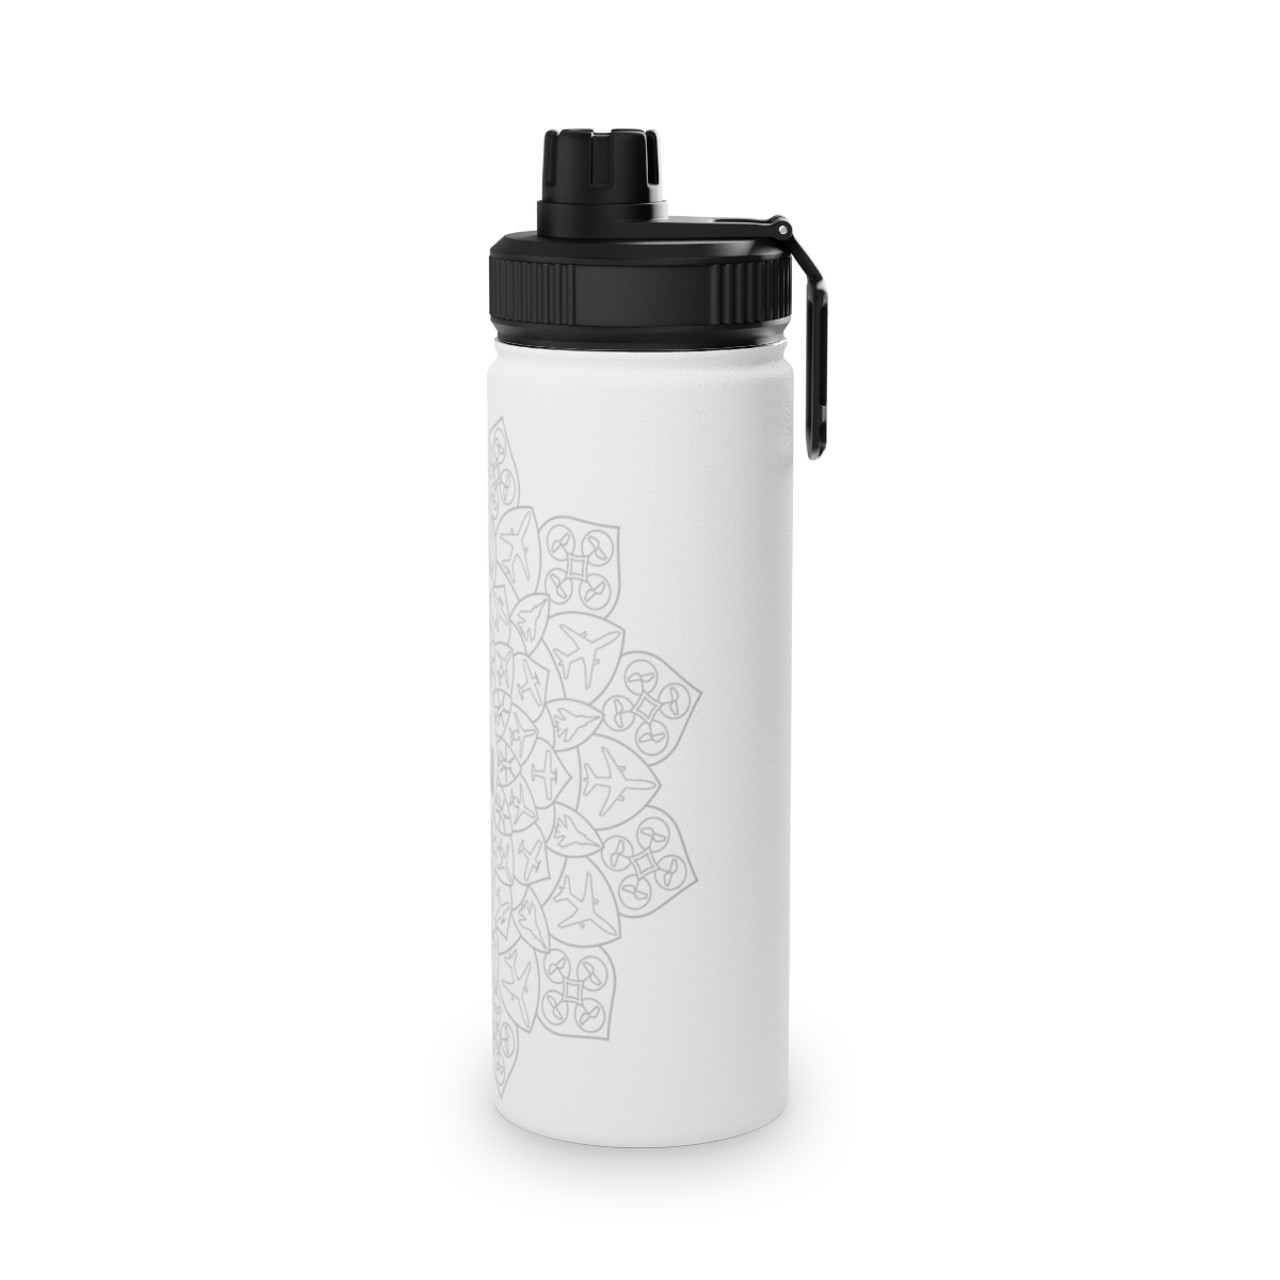 https://cdn11.bigcommerce.com/s-sqlllpksfp/images/stencil/1280x1280/products/214/795/18-oz-white-stainless-steel-water-bottle-with-sports-lid__67627.1696437587.jpg?c=1?imbypass=on